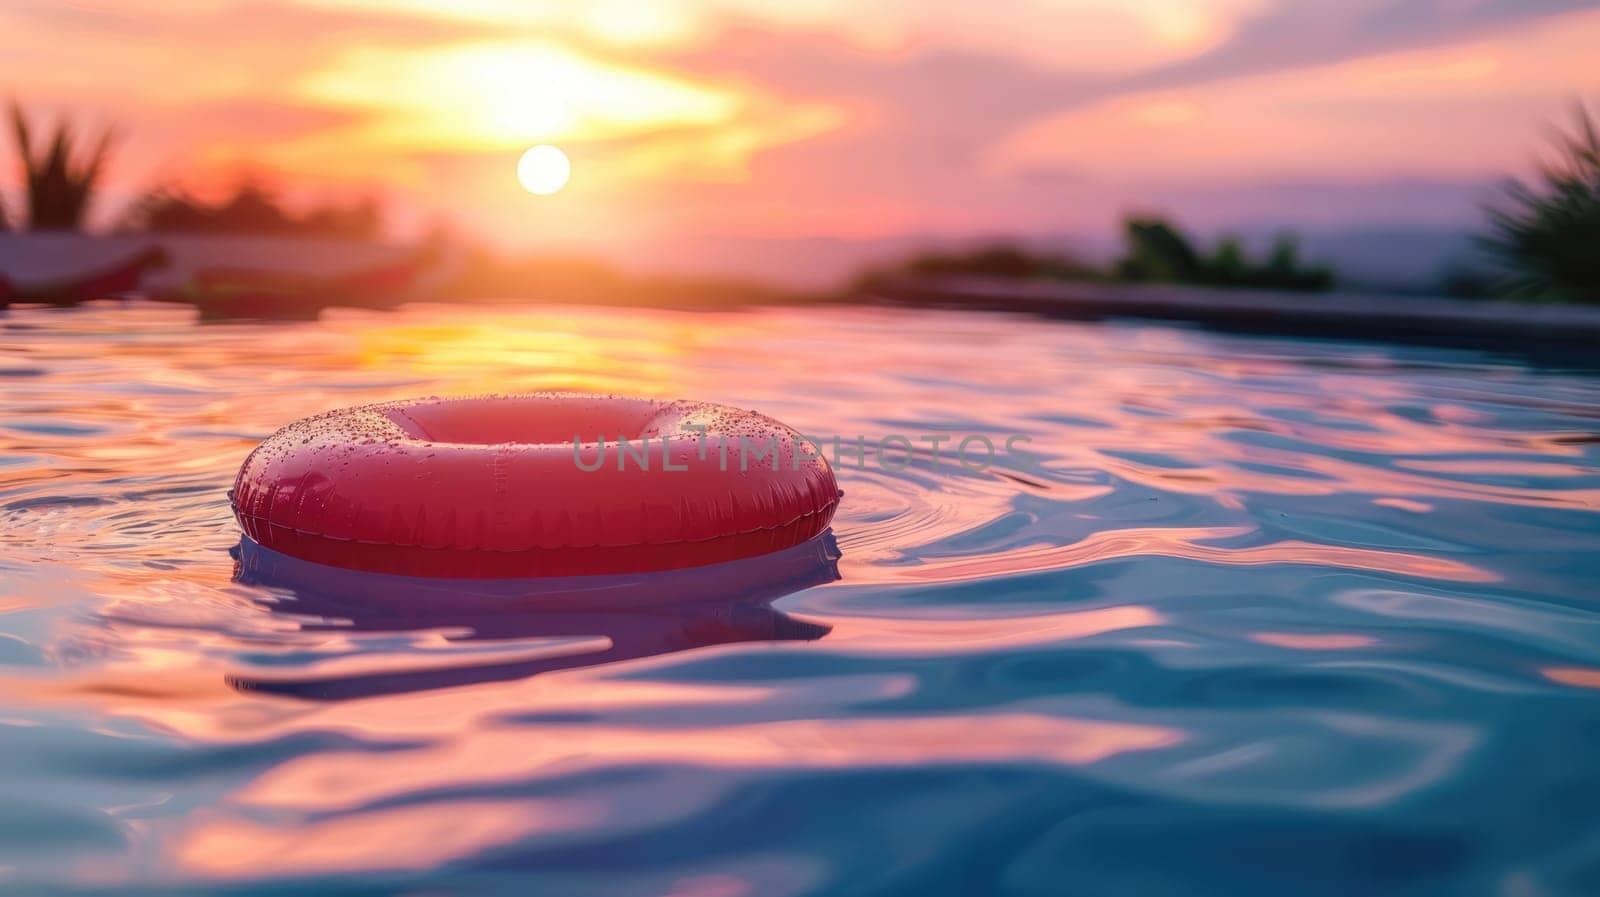 Inflatable ring in the pool overlooking the sunset by natali_brill